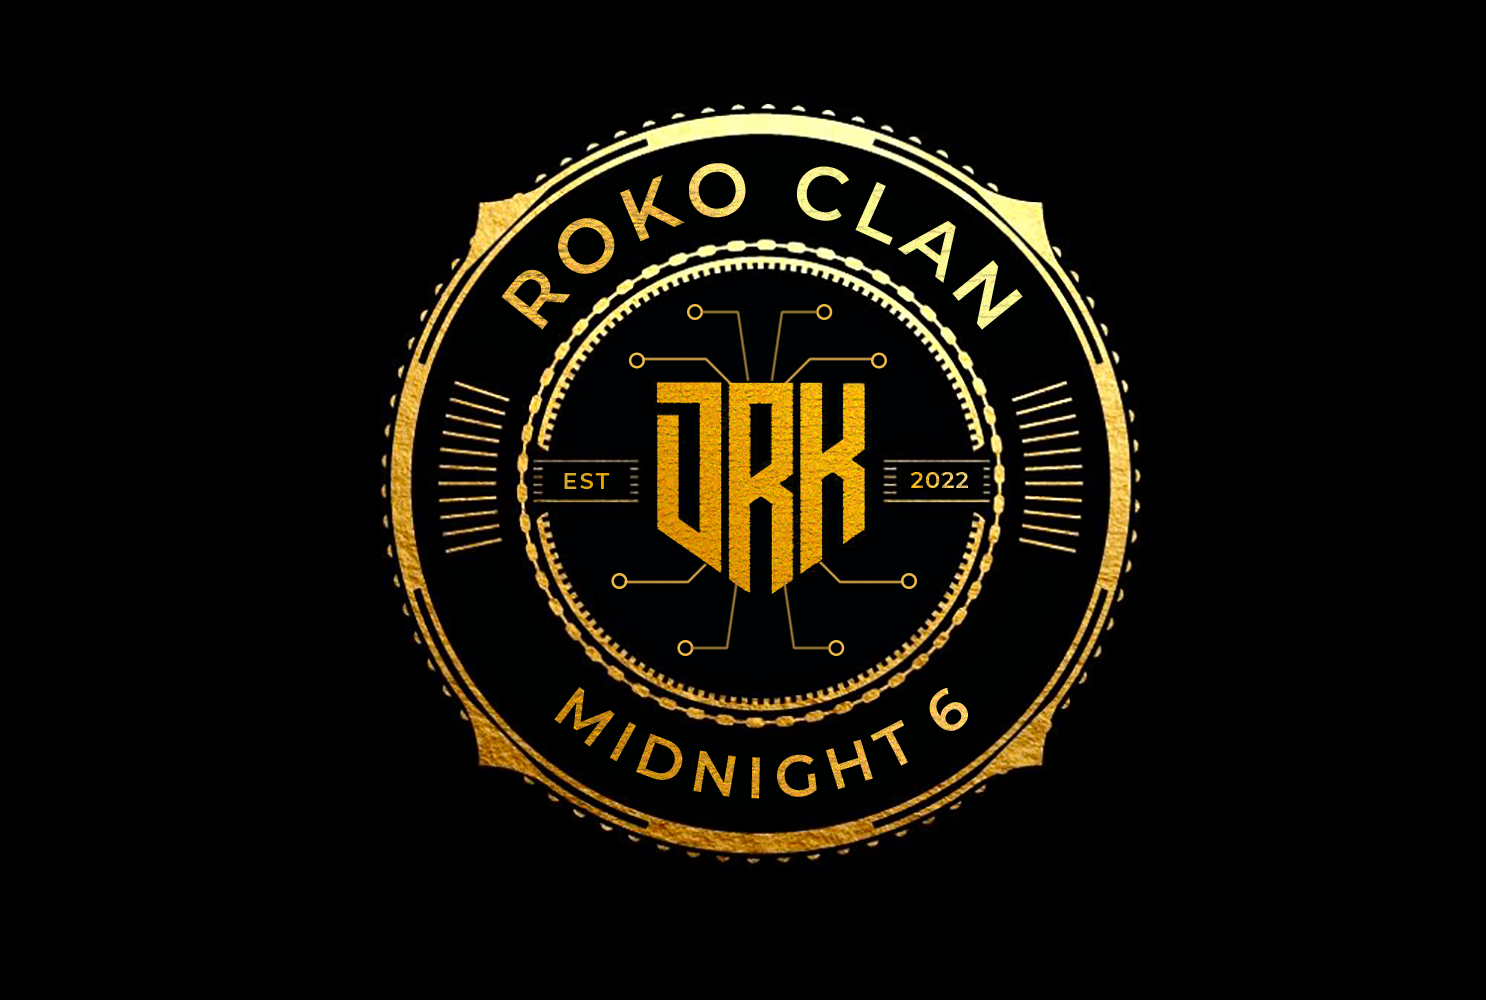 Roko Clan Launches NFT Pre-Sale Event